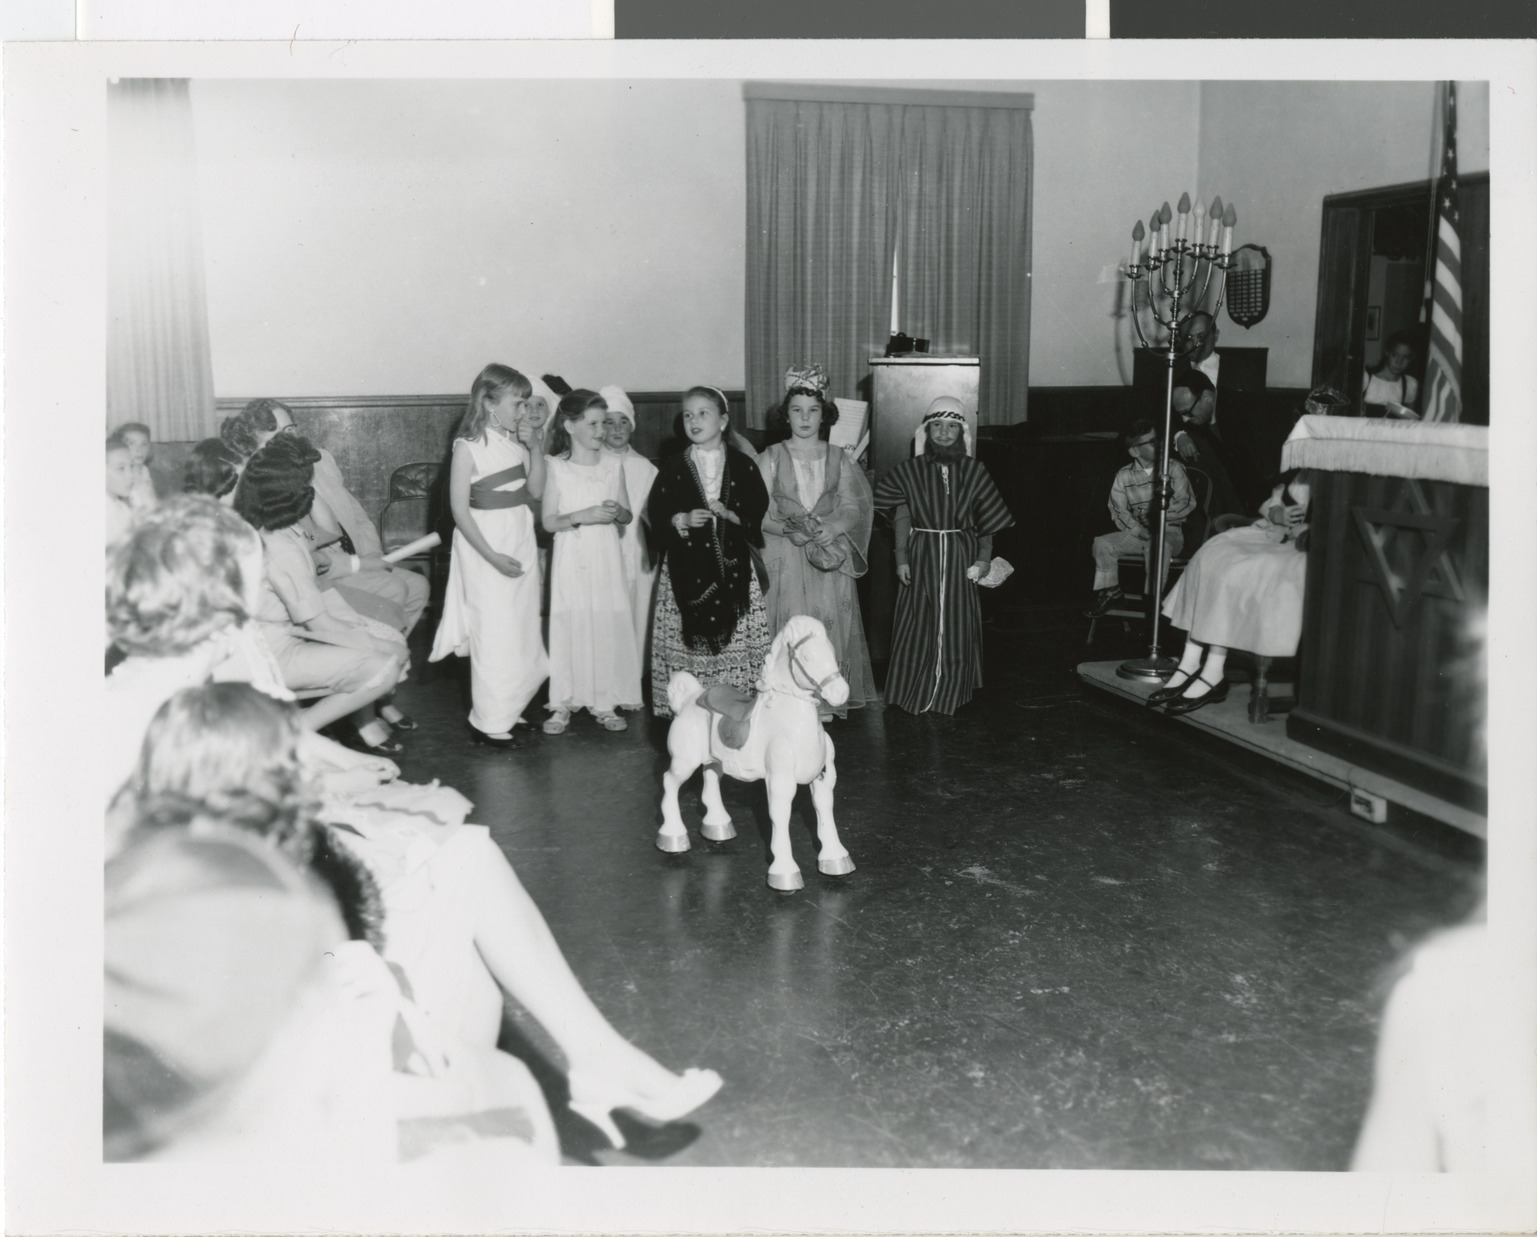 Photograph of a children's play, 1960s